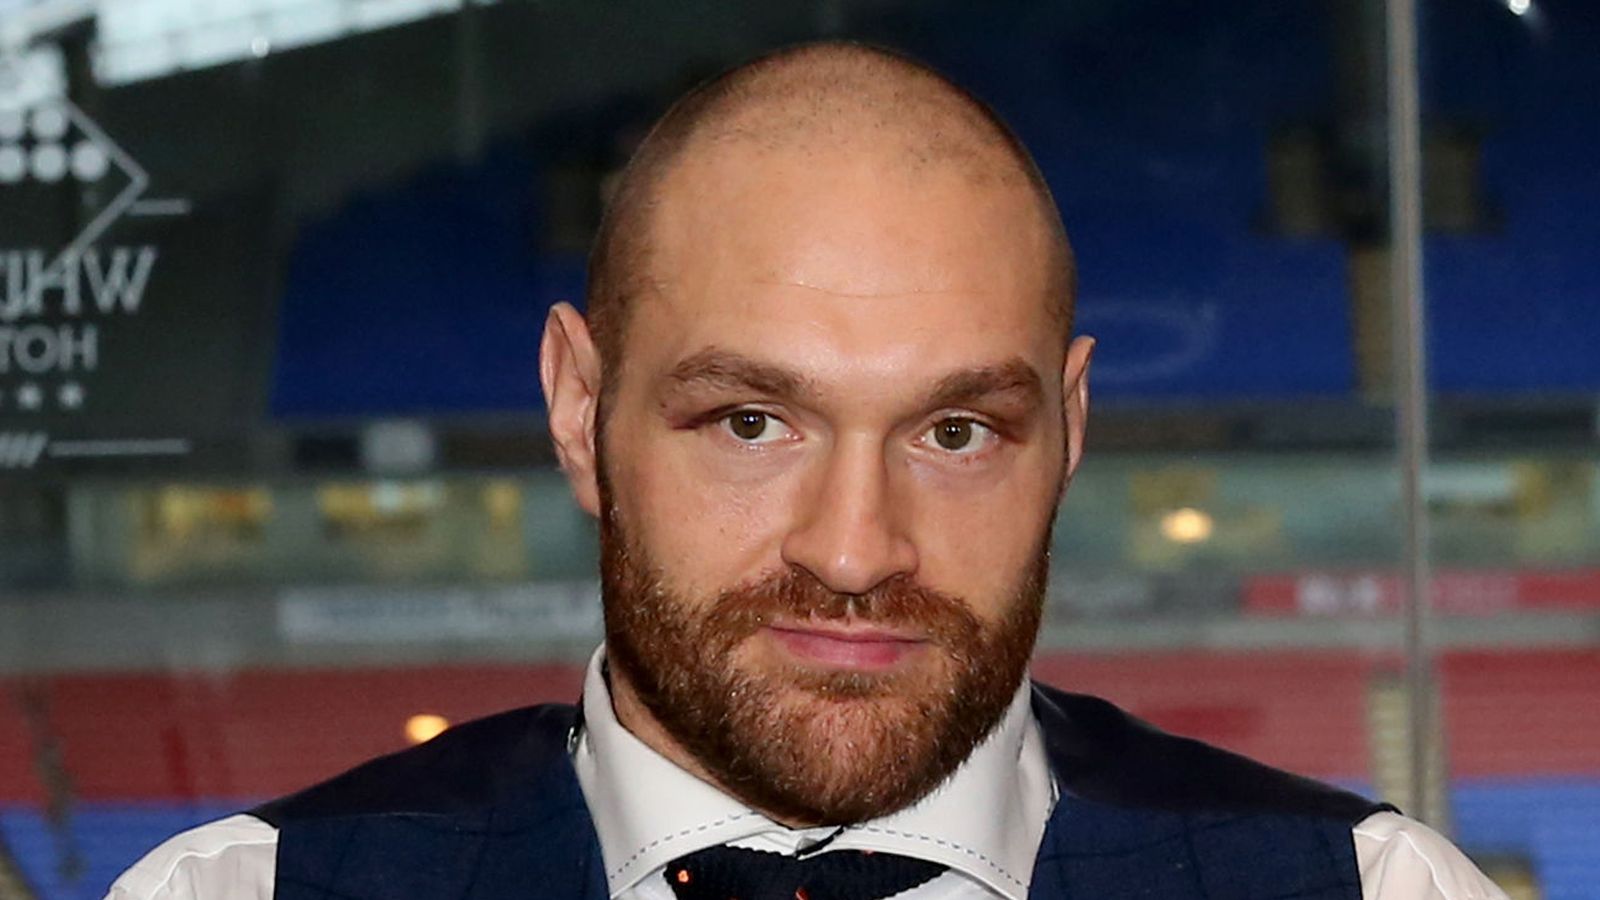 Tyson Fury's controversial comments lead to hate crime allegation